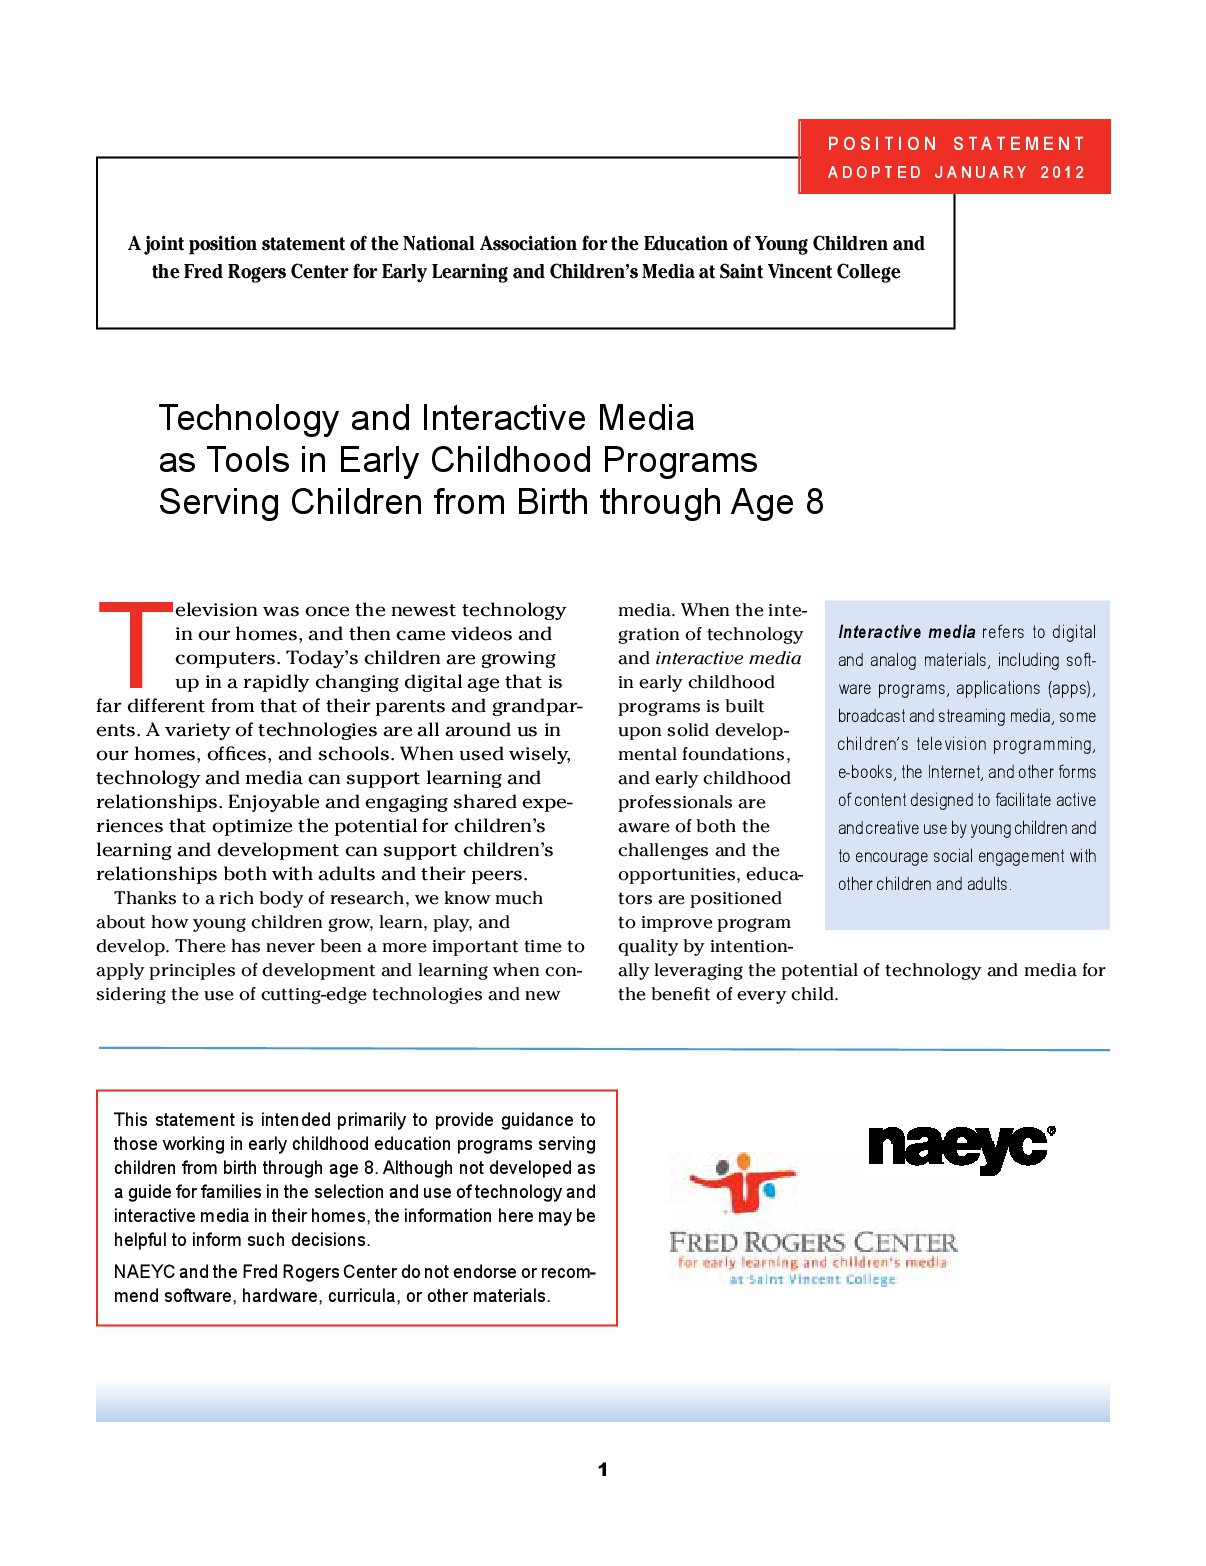 Technology and Interactive Media as tools in Early Childhood Programs serving Children from Birth through Age 8